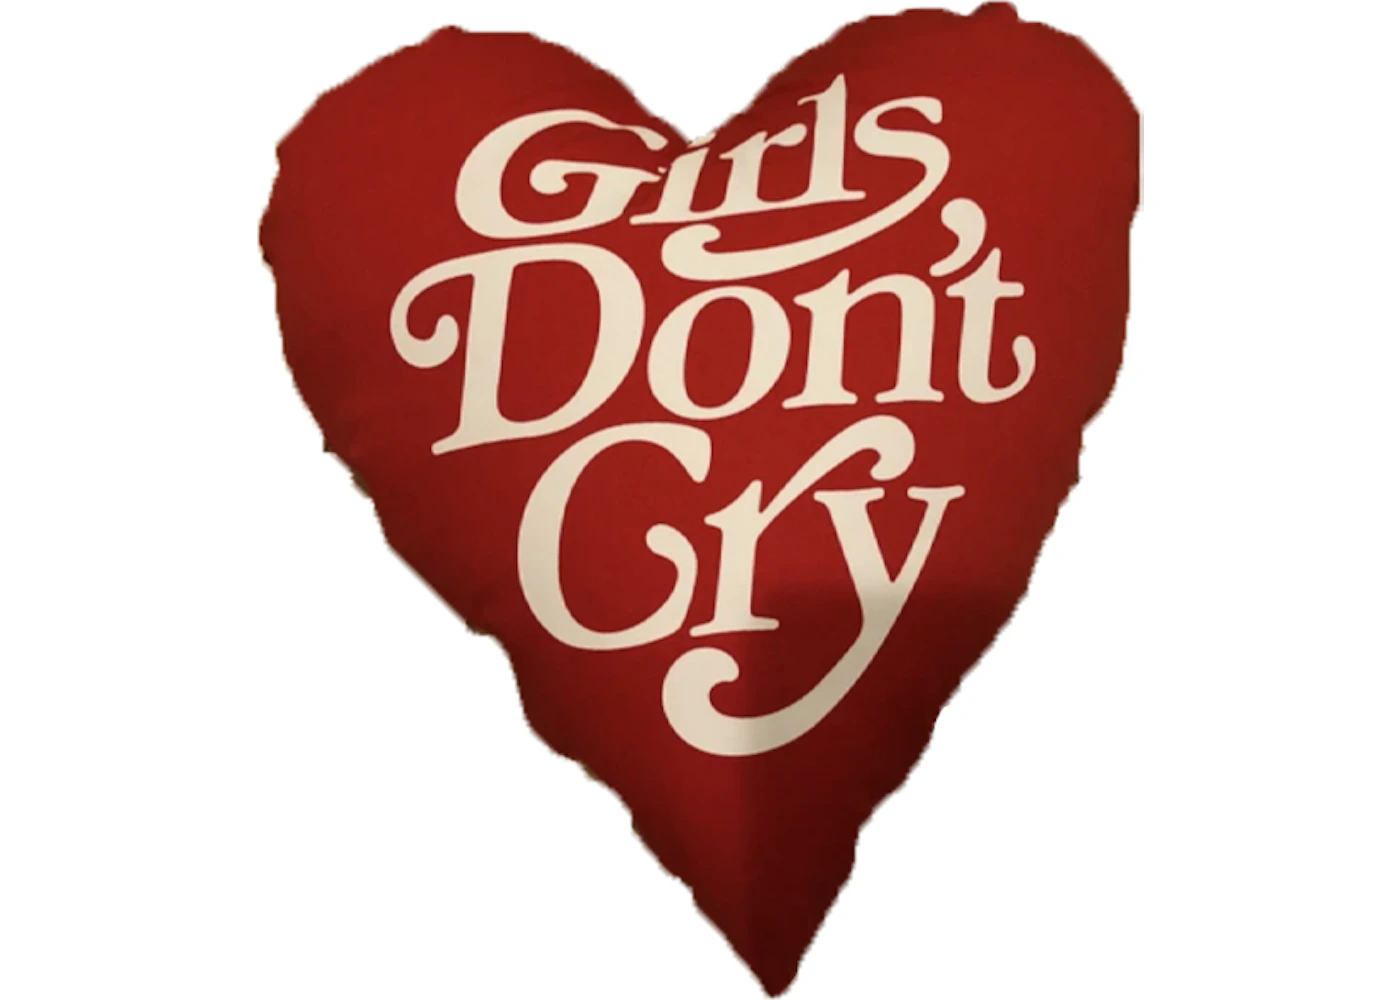 girls don't cry